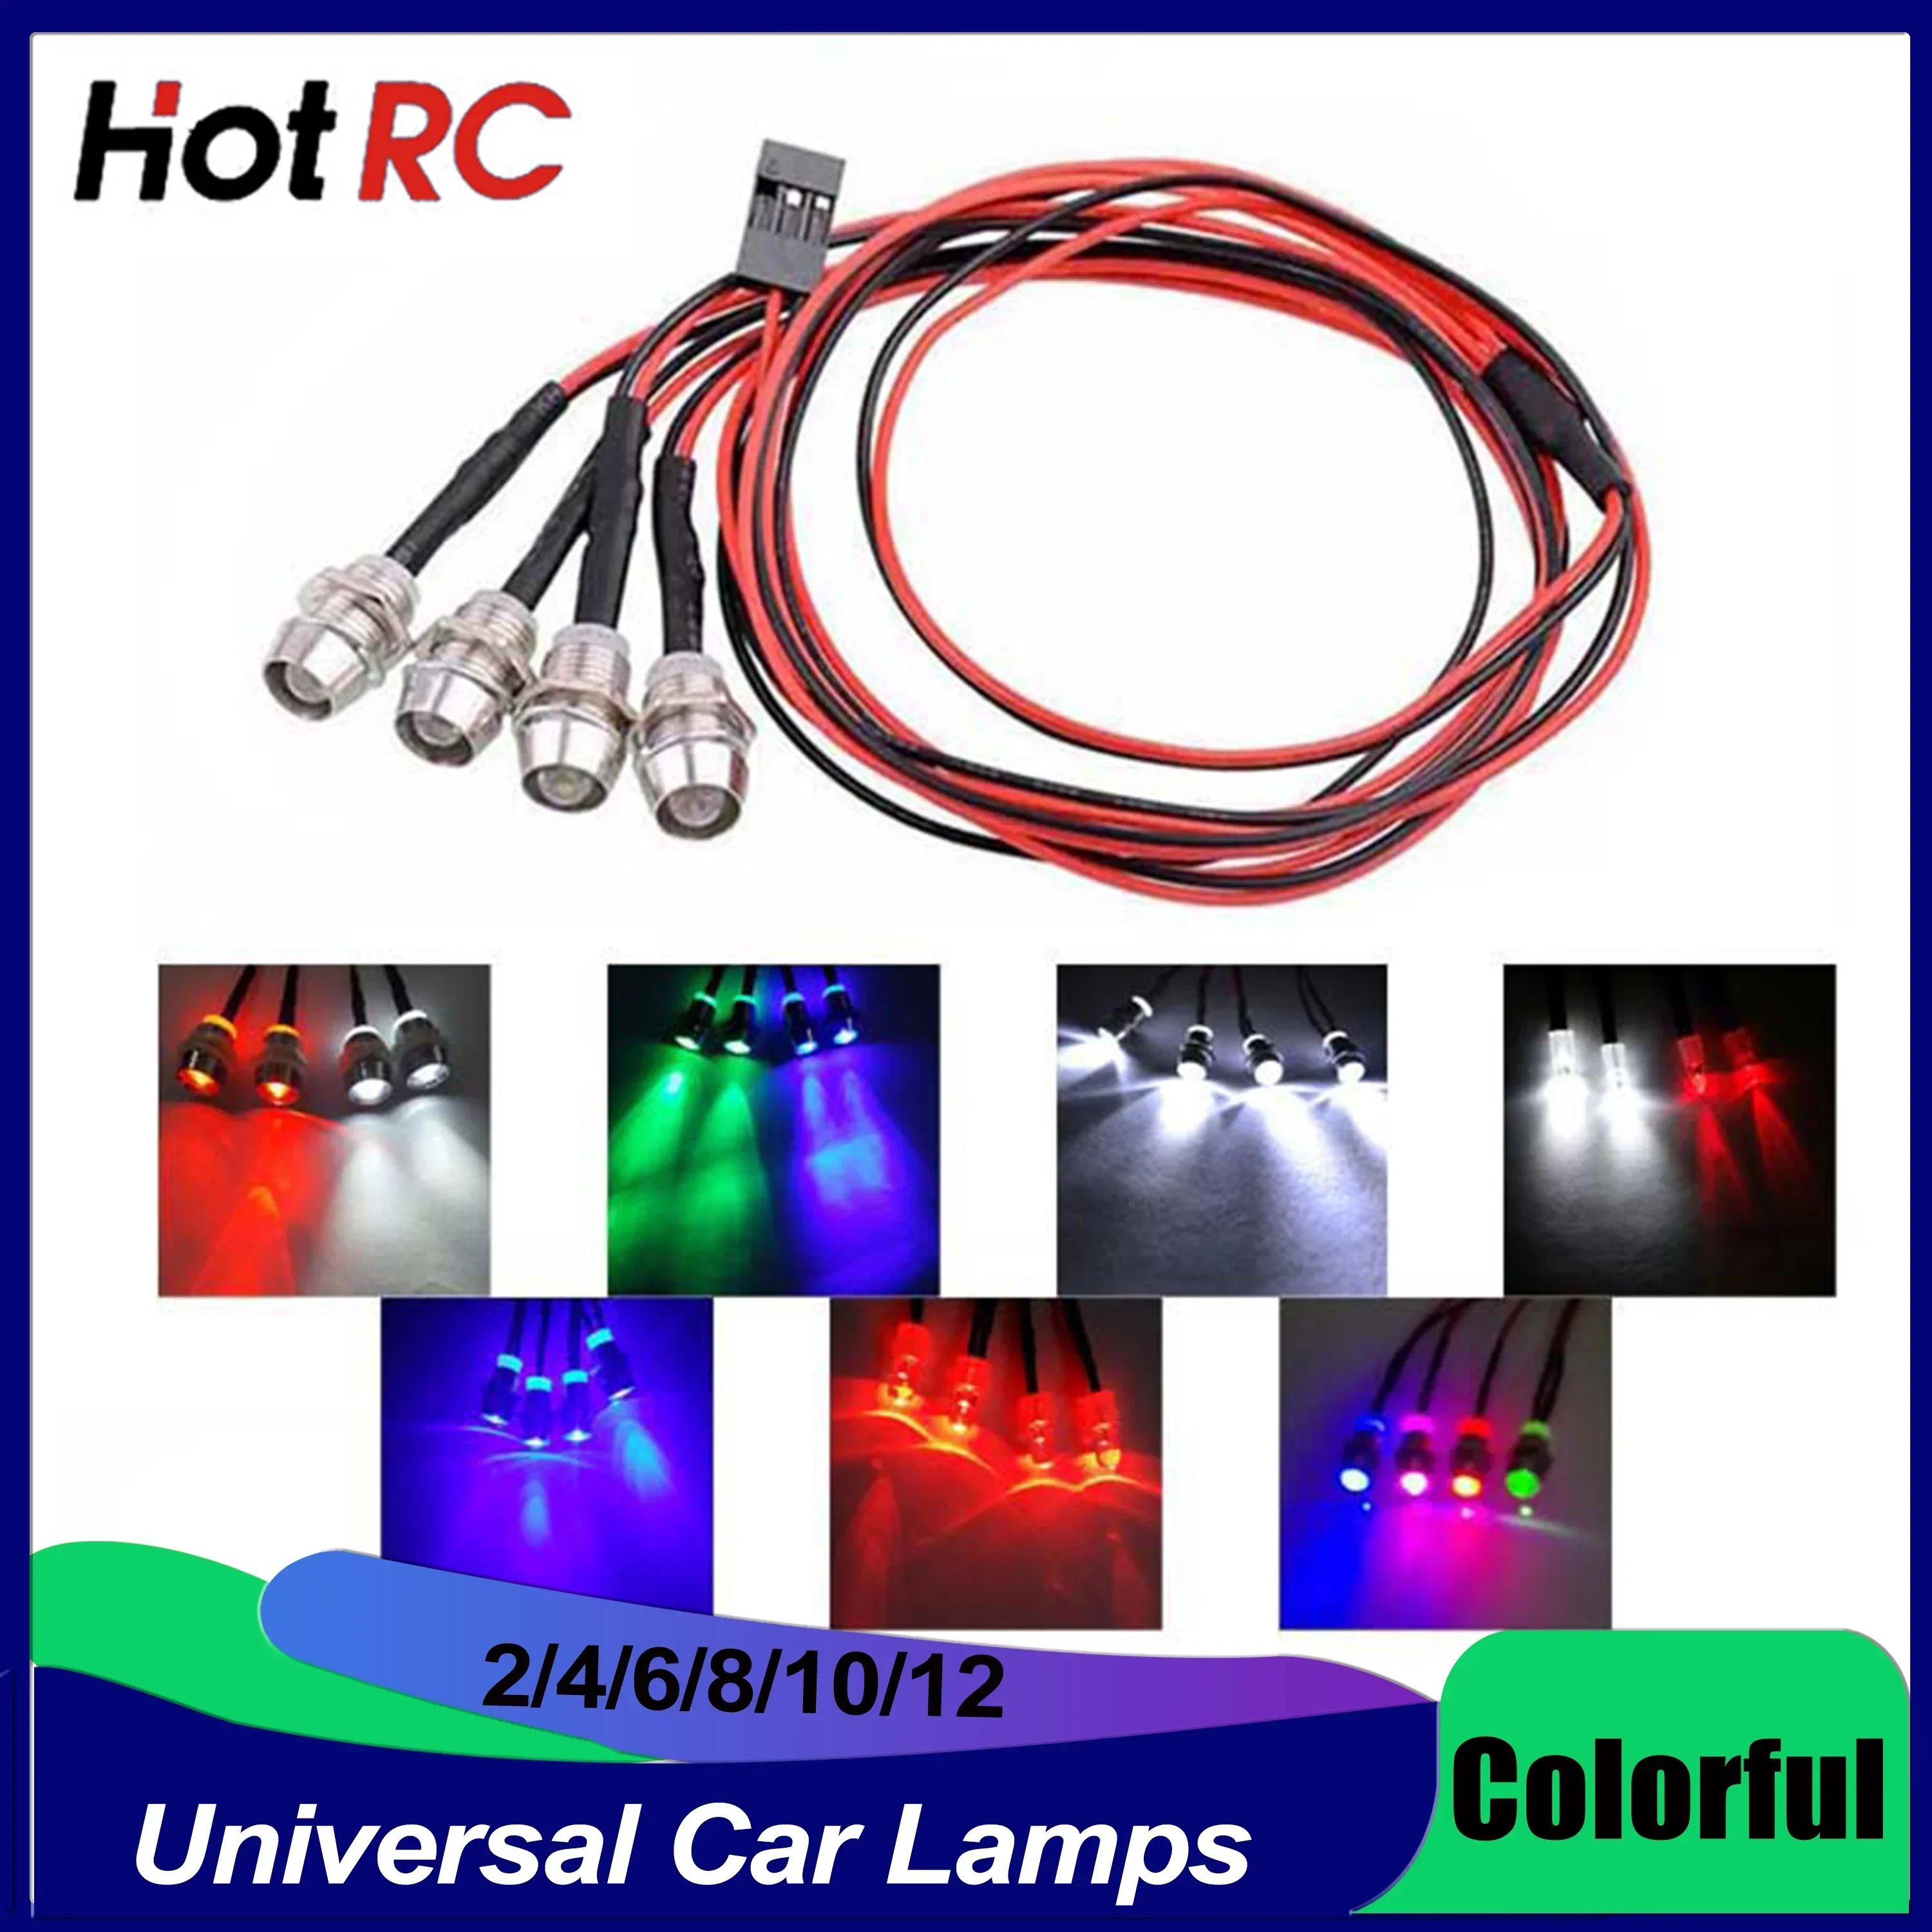 Main 3mm 5mm 8mm RC Car Lamp Universal LED Lights for 1/8 1/10 1/12 1/24 Axial Scx10 Traxxas Trx4 Hsp Redcat Tamiya Crawler Truck image